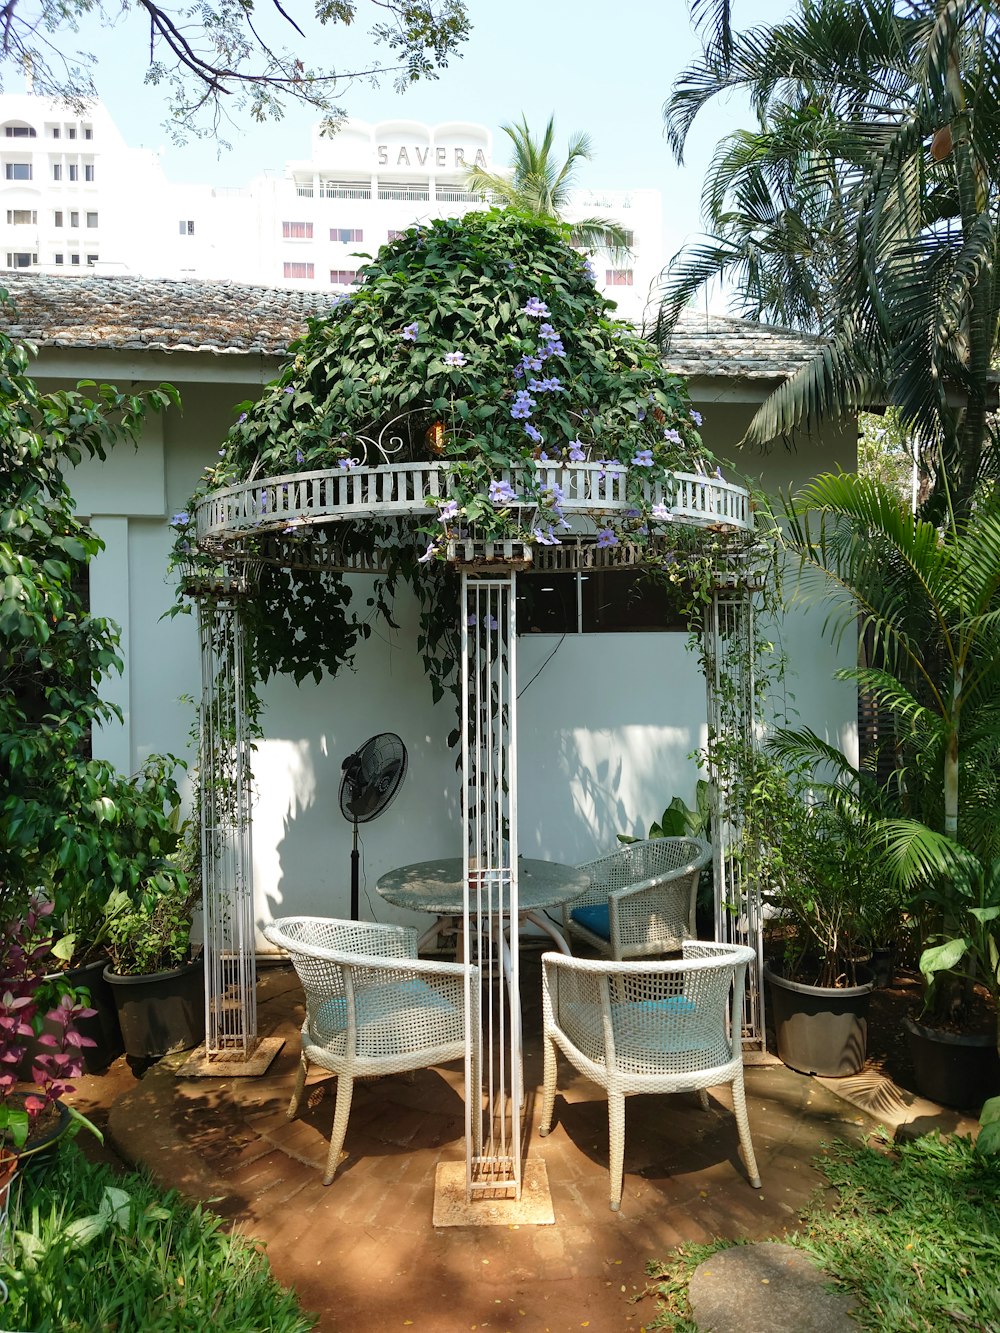 a gazebo with a table and chairs in a garden